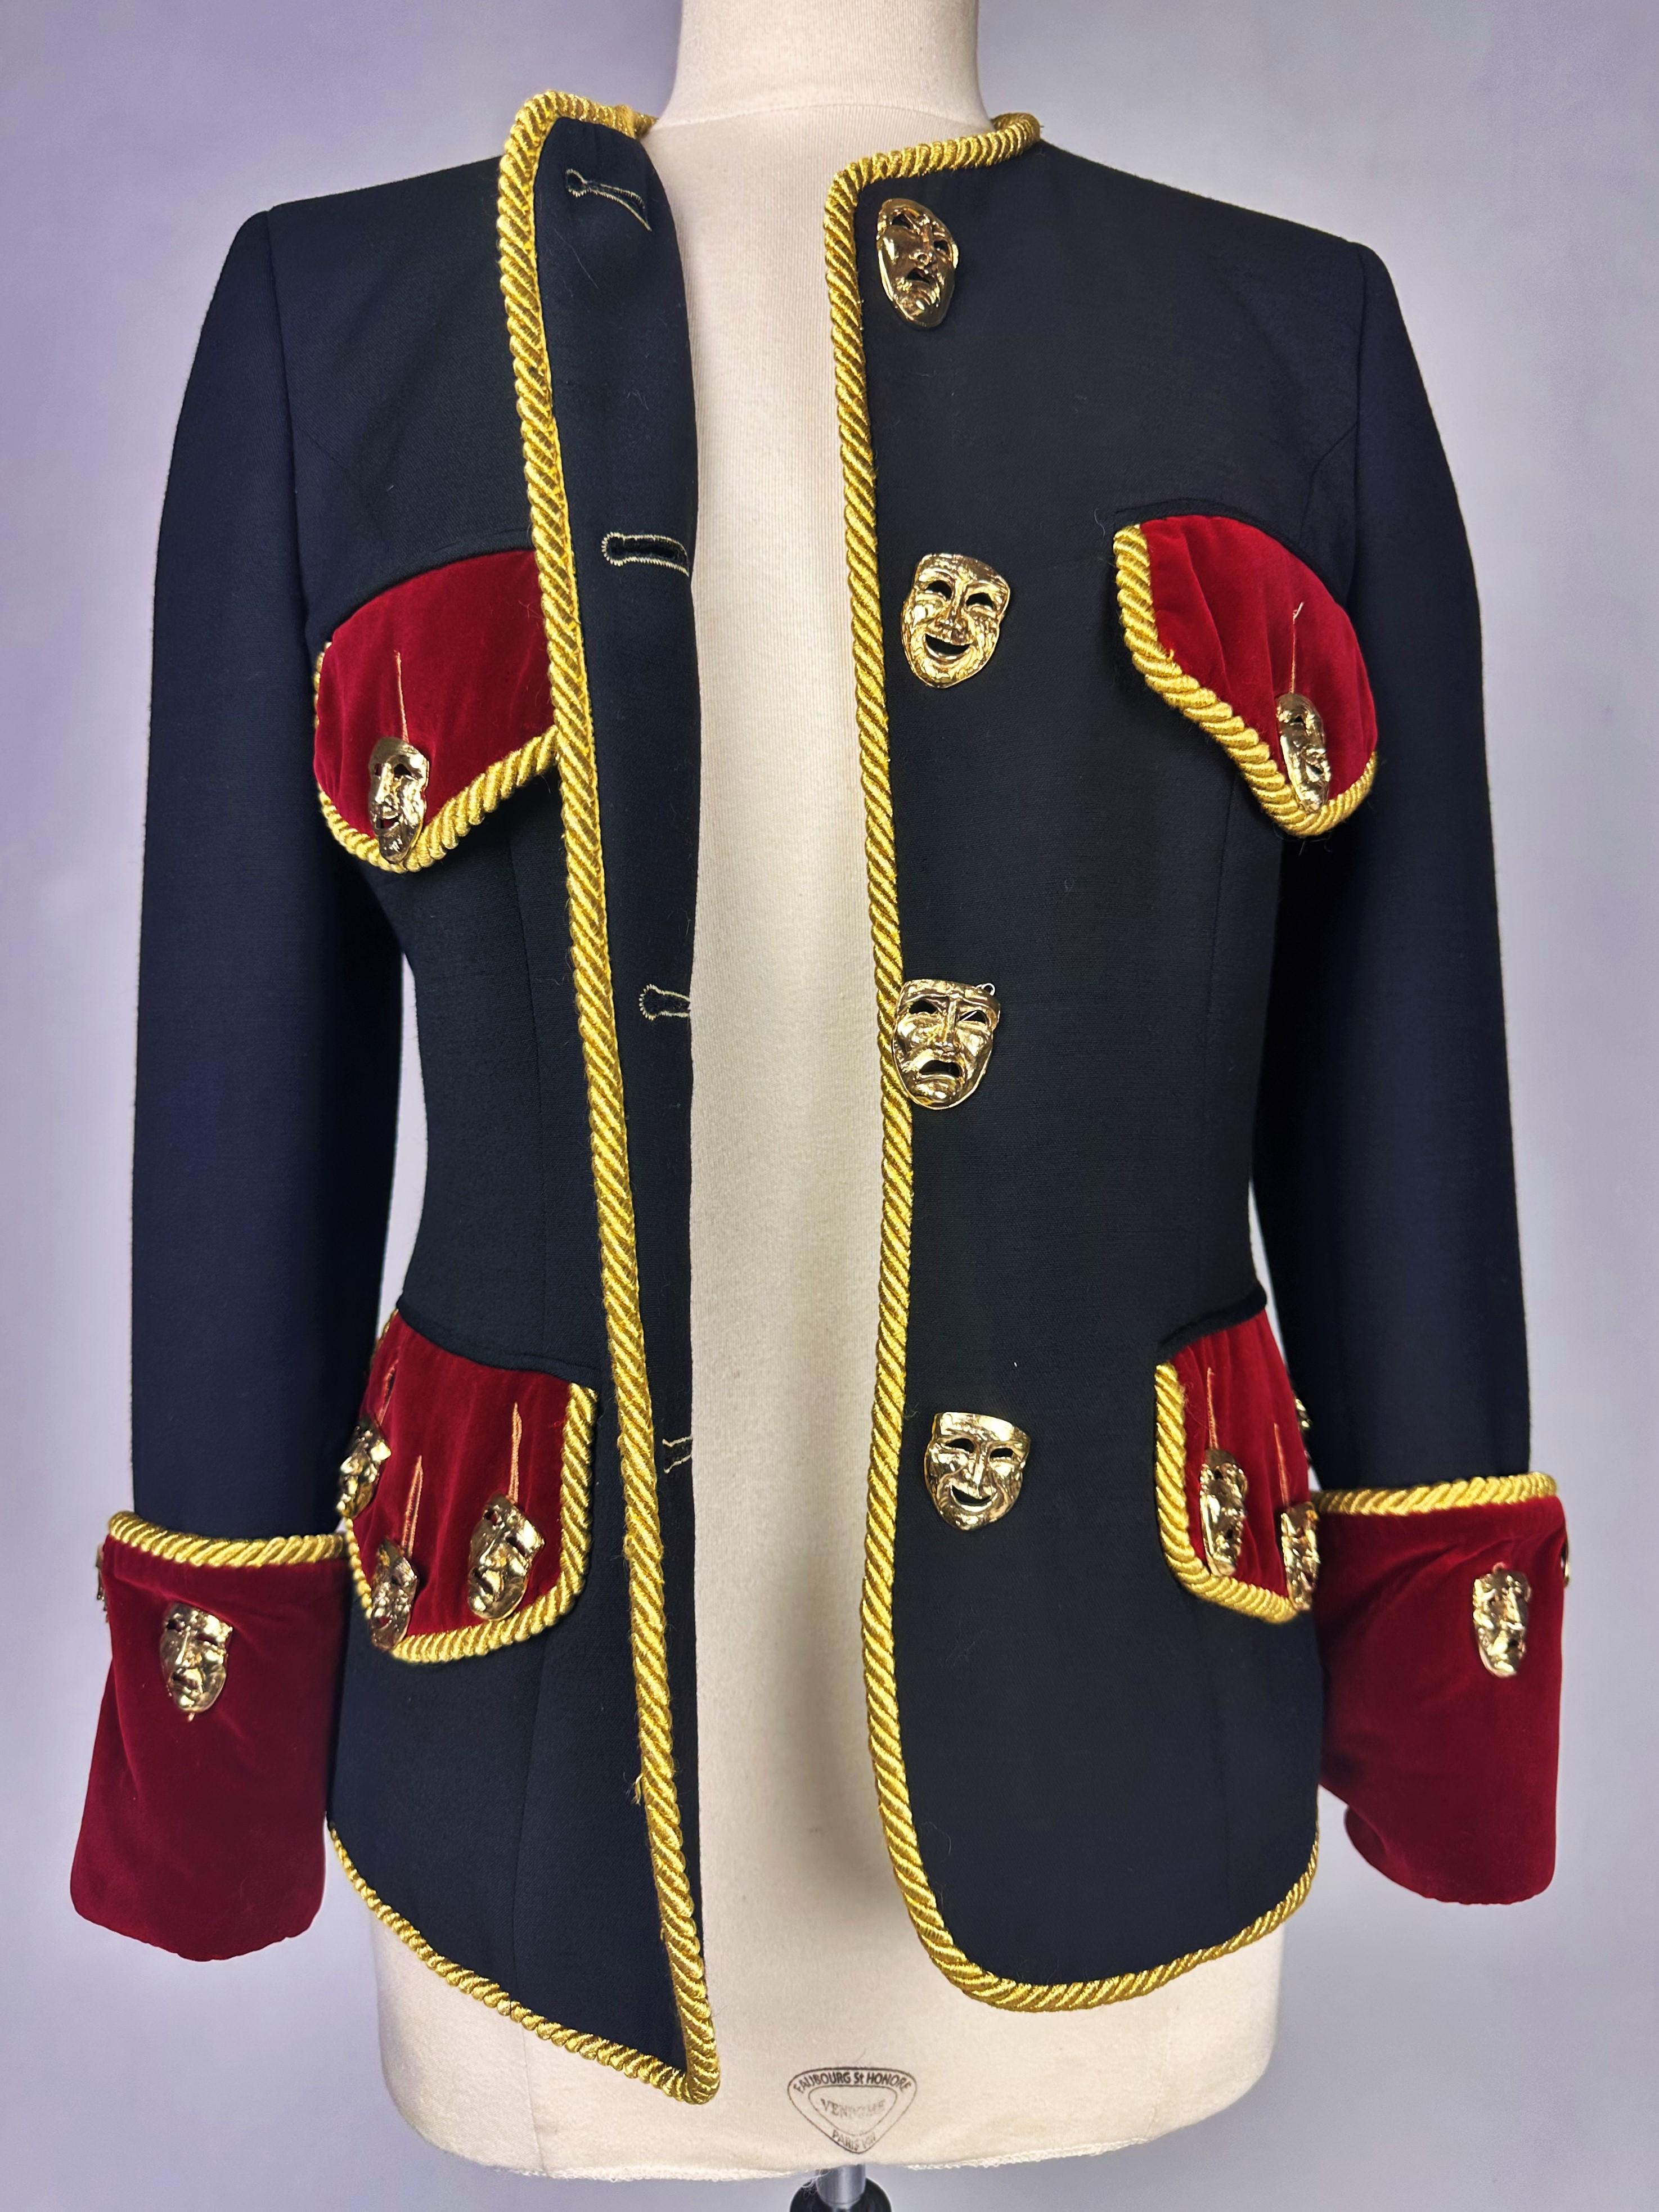 An Evening Jacket by Franco Moschino Couture Circa 1990 In Good Condition For Sale In Toulon, FR